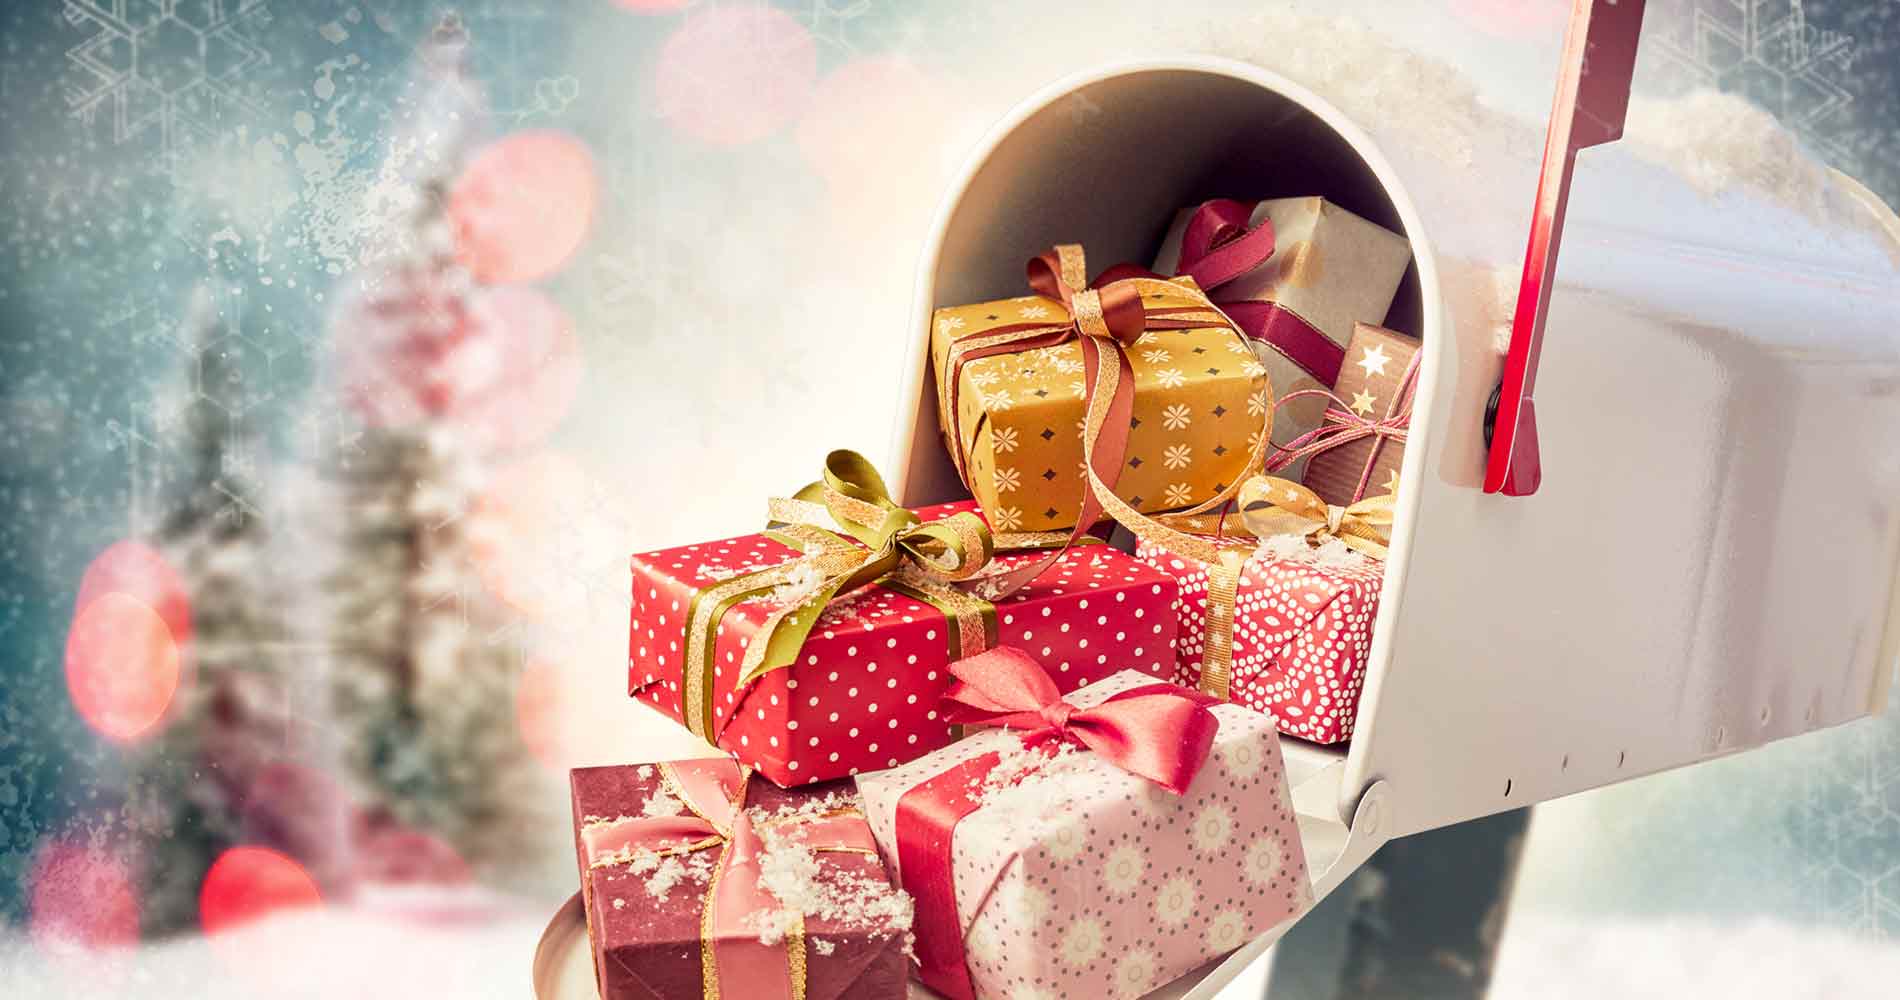 Festive & Fun Virtual Holiday Gift Exchanges 